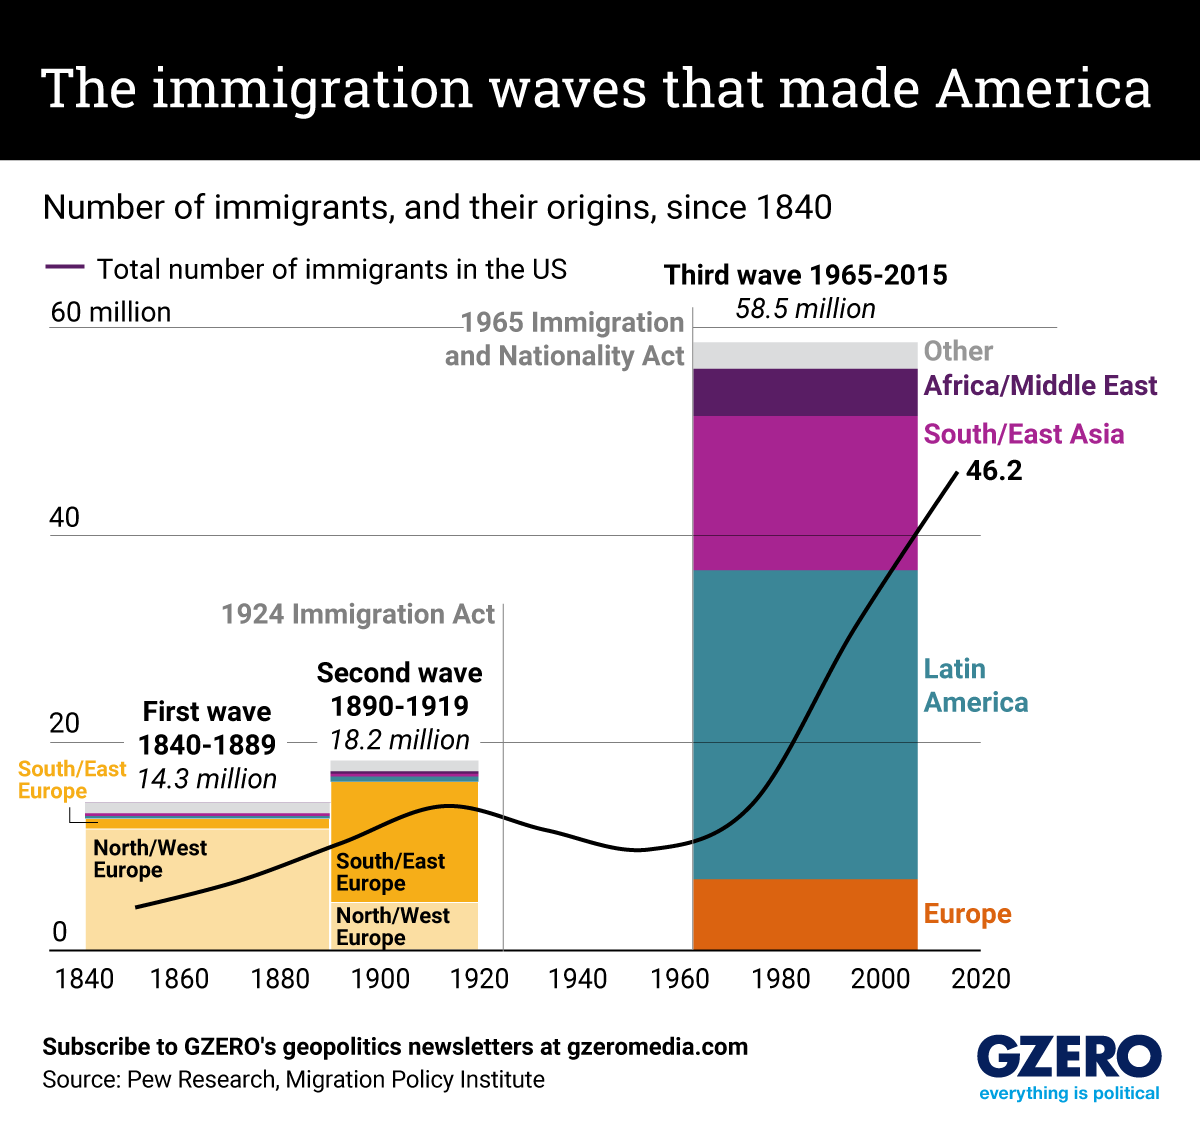 Graphic Truth: The immigration waves that made America